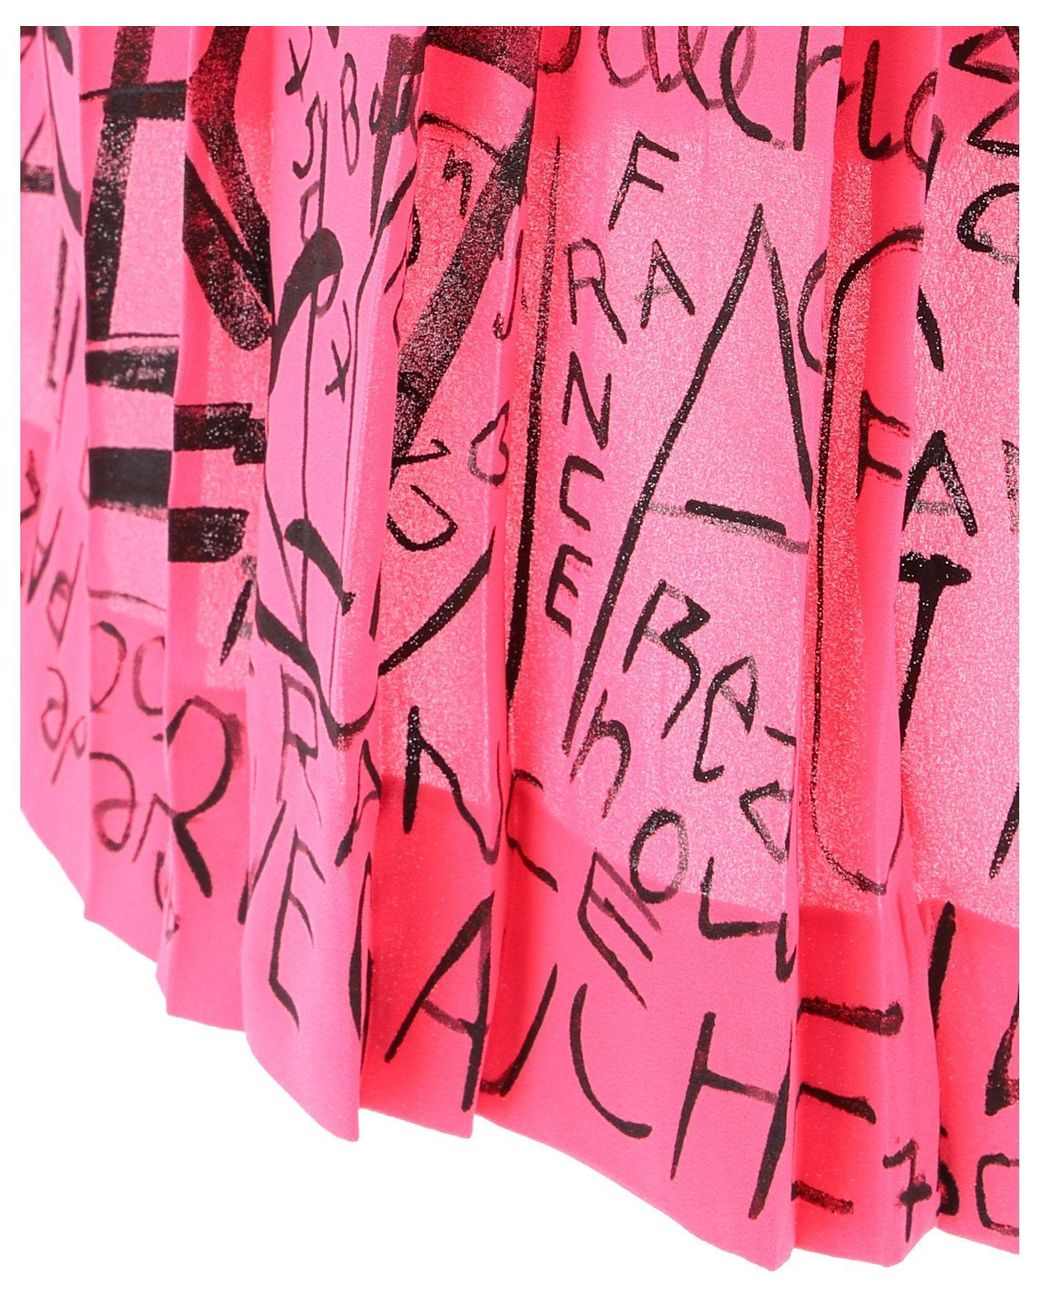 Balenciaga Synthetic Graffiti Crepe Tie-neck Dress in Pink | Lyst